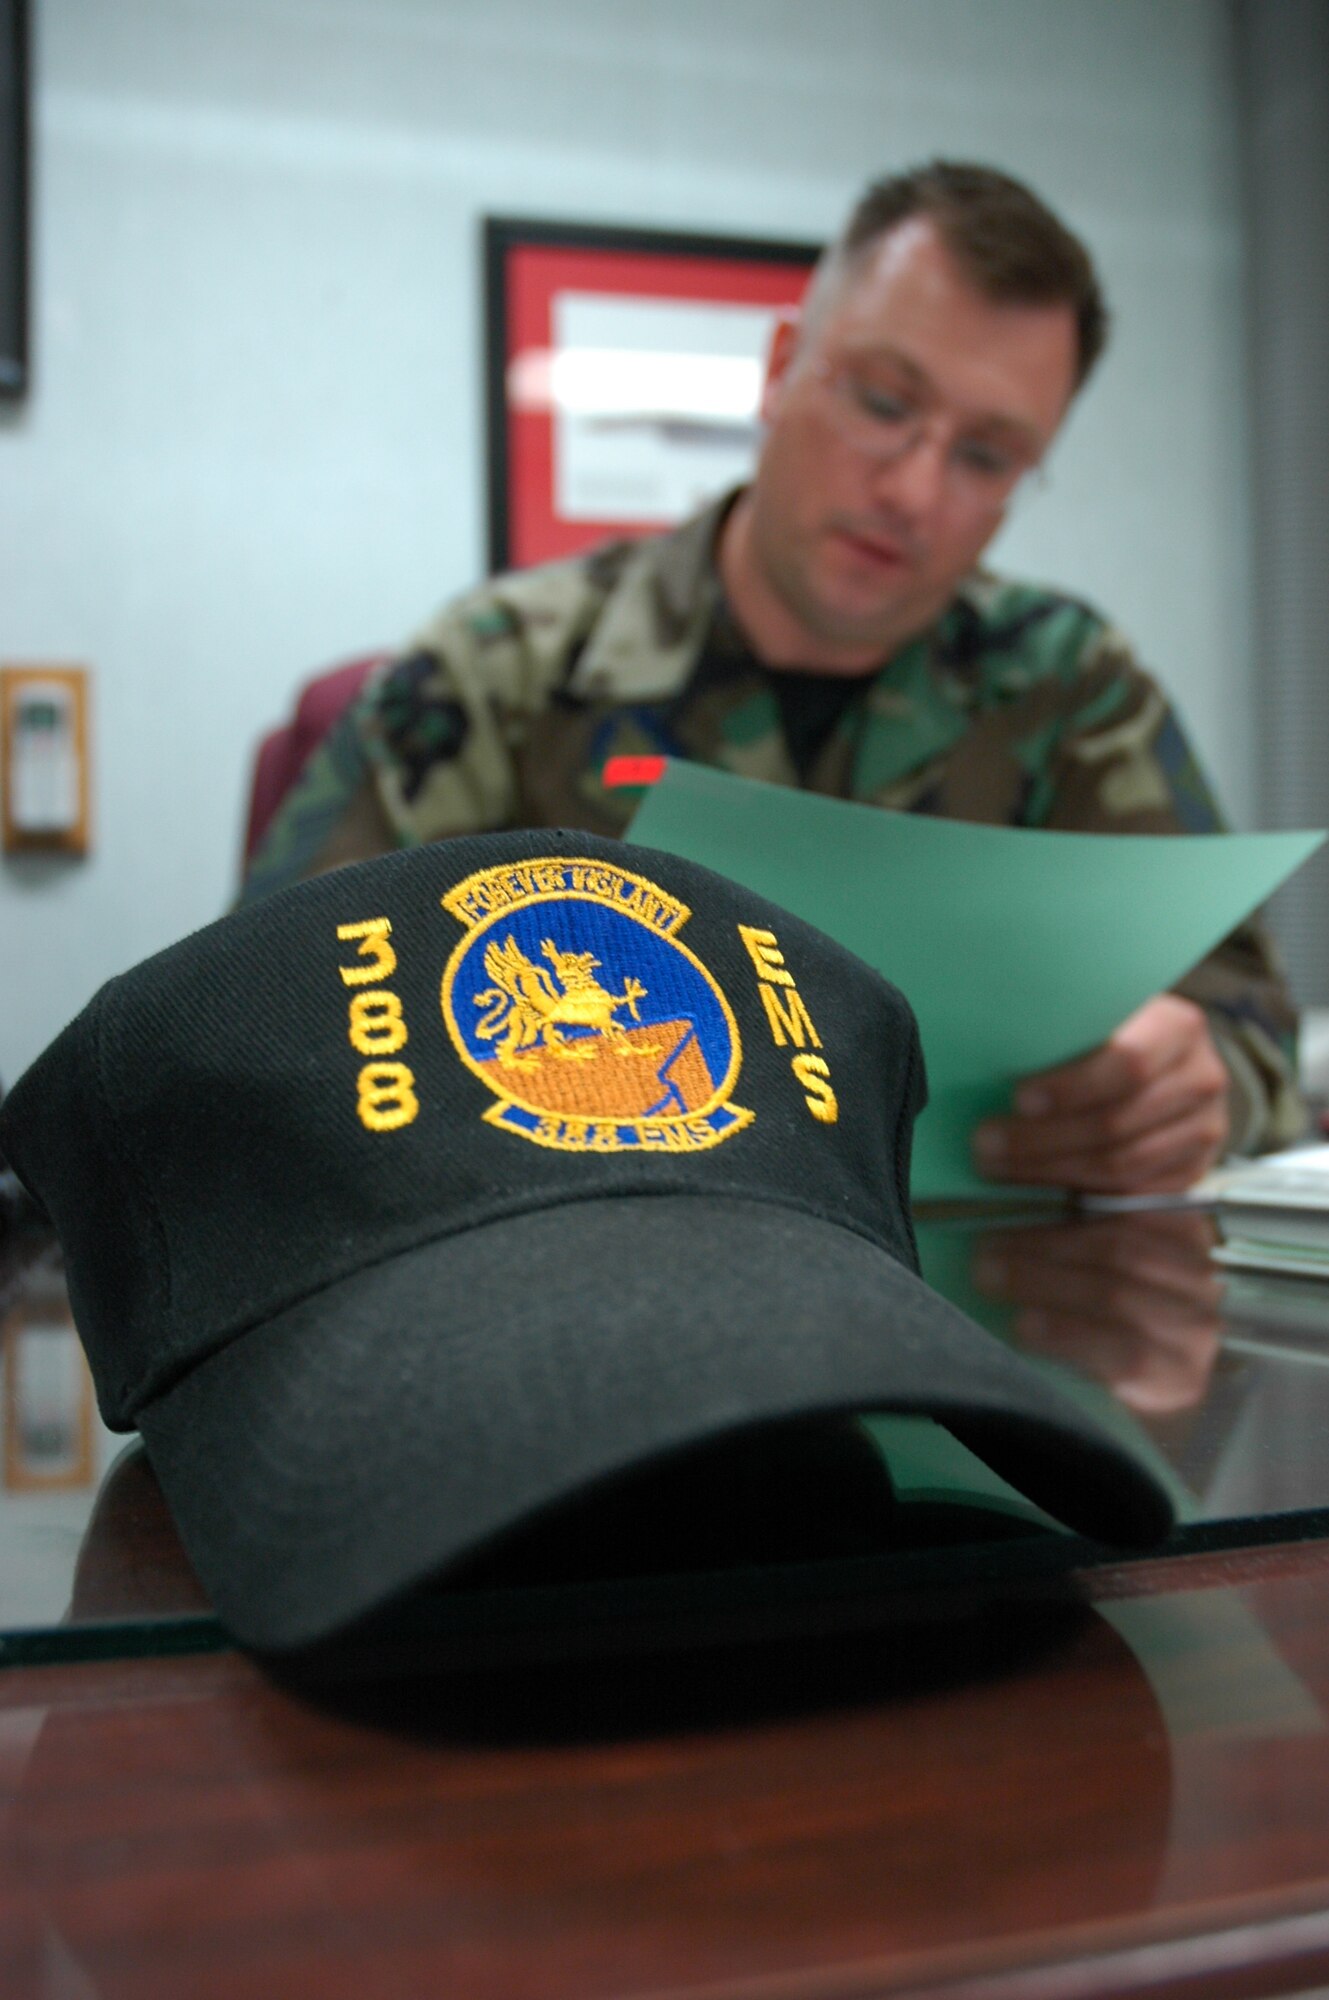 HILL AIR FORCE BASE, Utah-- Senior Master Sgt. Scott Martin, first sergeant for the 388th Equipment Maintenance Squadron, under the 388th Fighter Wing, reviews an Airman's personnel information file. (U.S. Air Force photo by Capt. Genieve David)